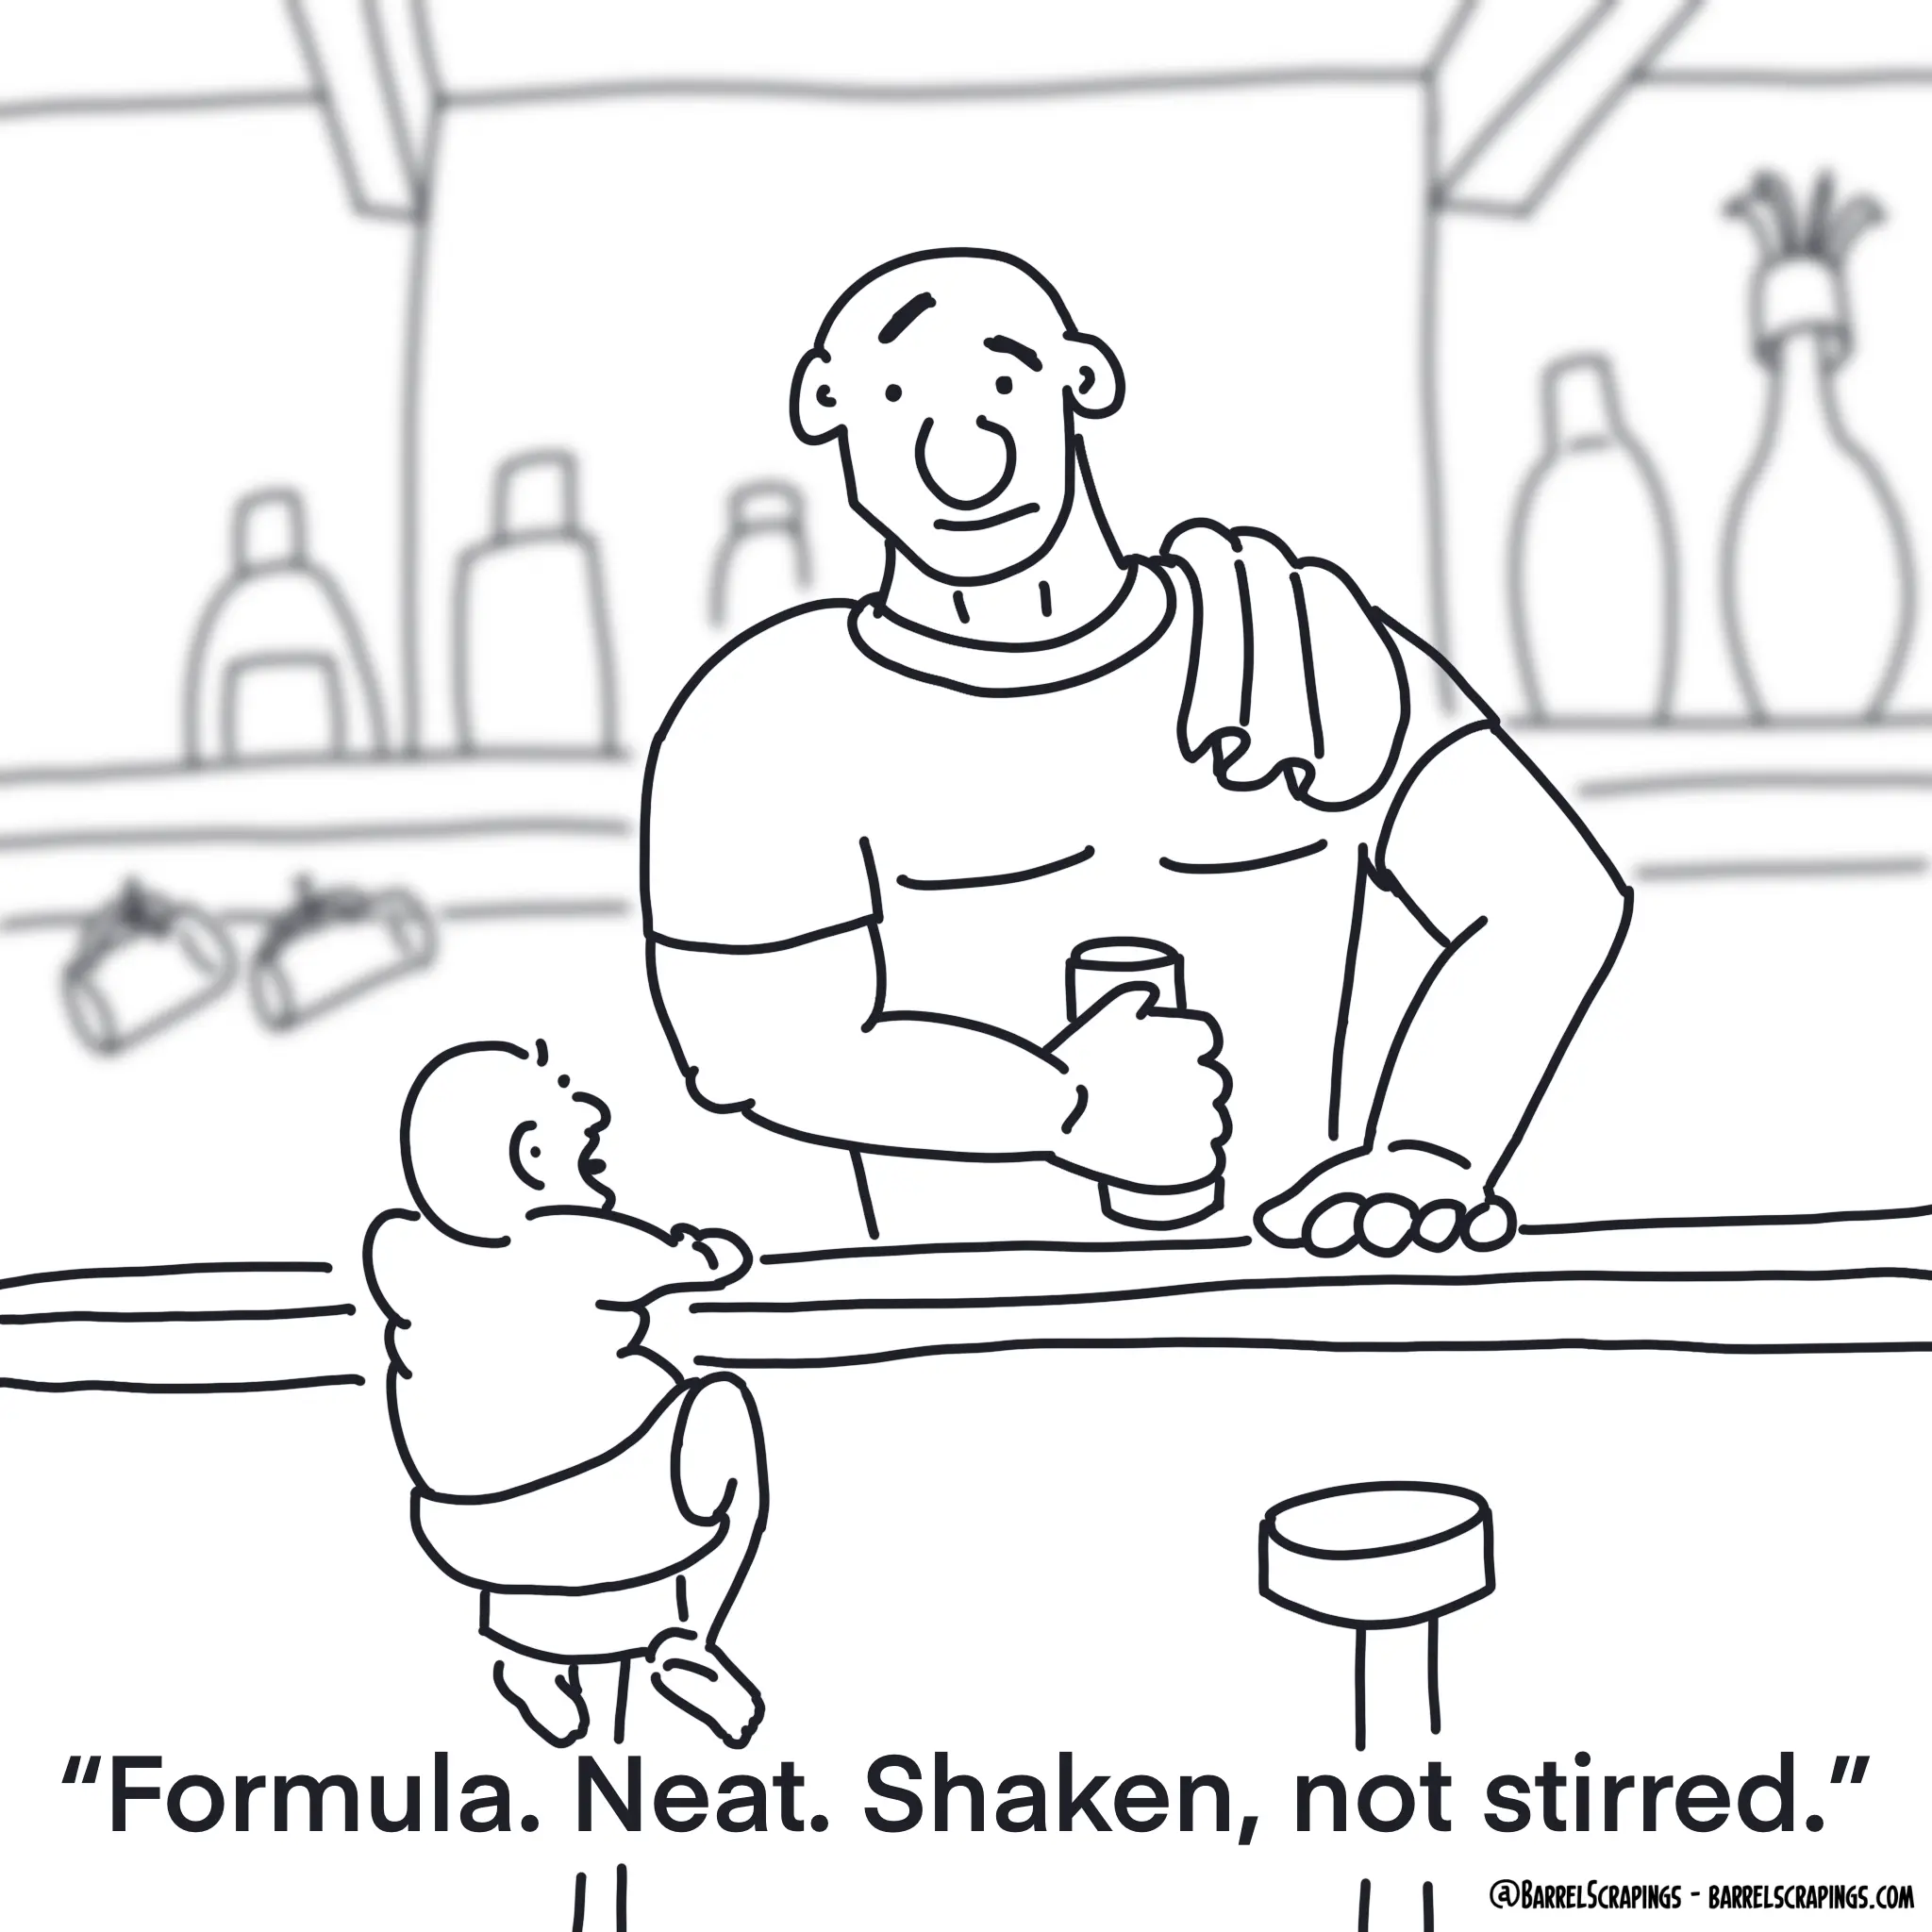 Scene of a bar. Baby is seated on stool facing a burly bartender, who is looking askance as the baby. Caption: “Formula. Neat. Shaken, not stirred.